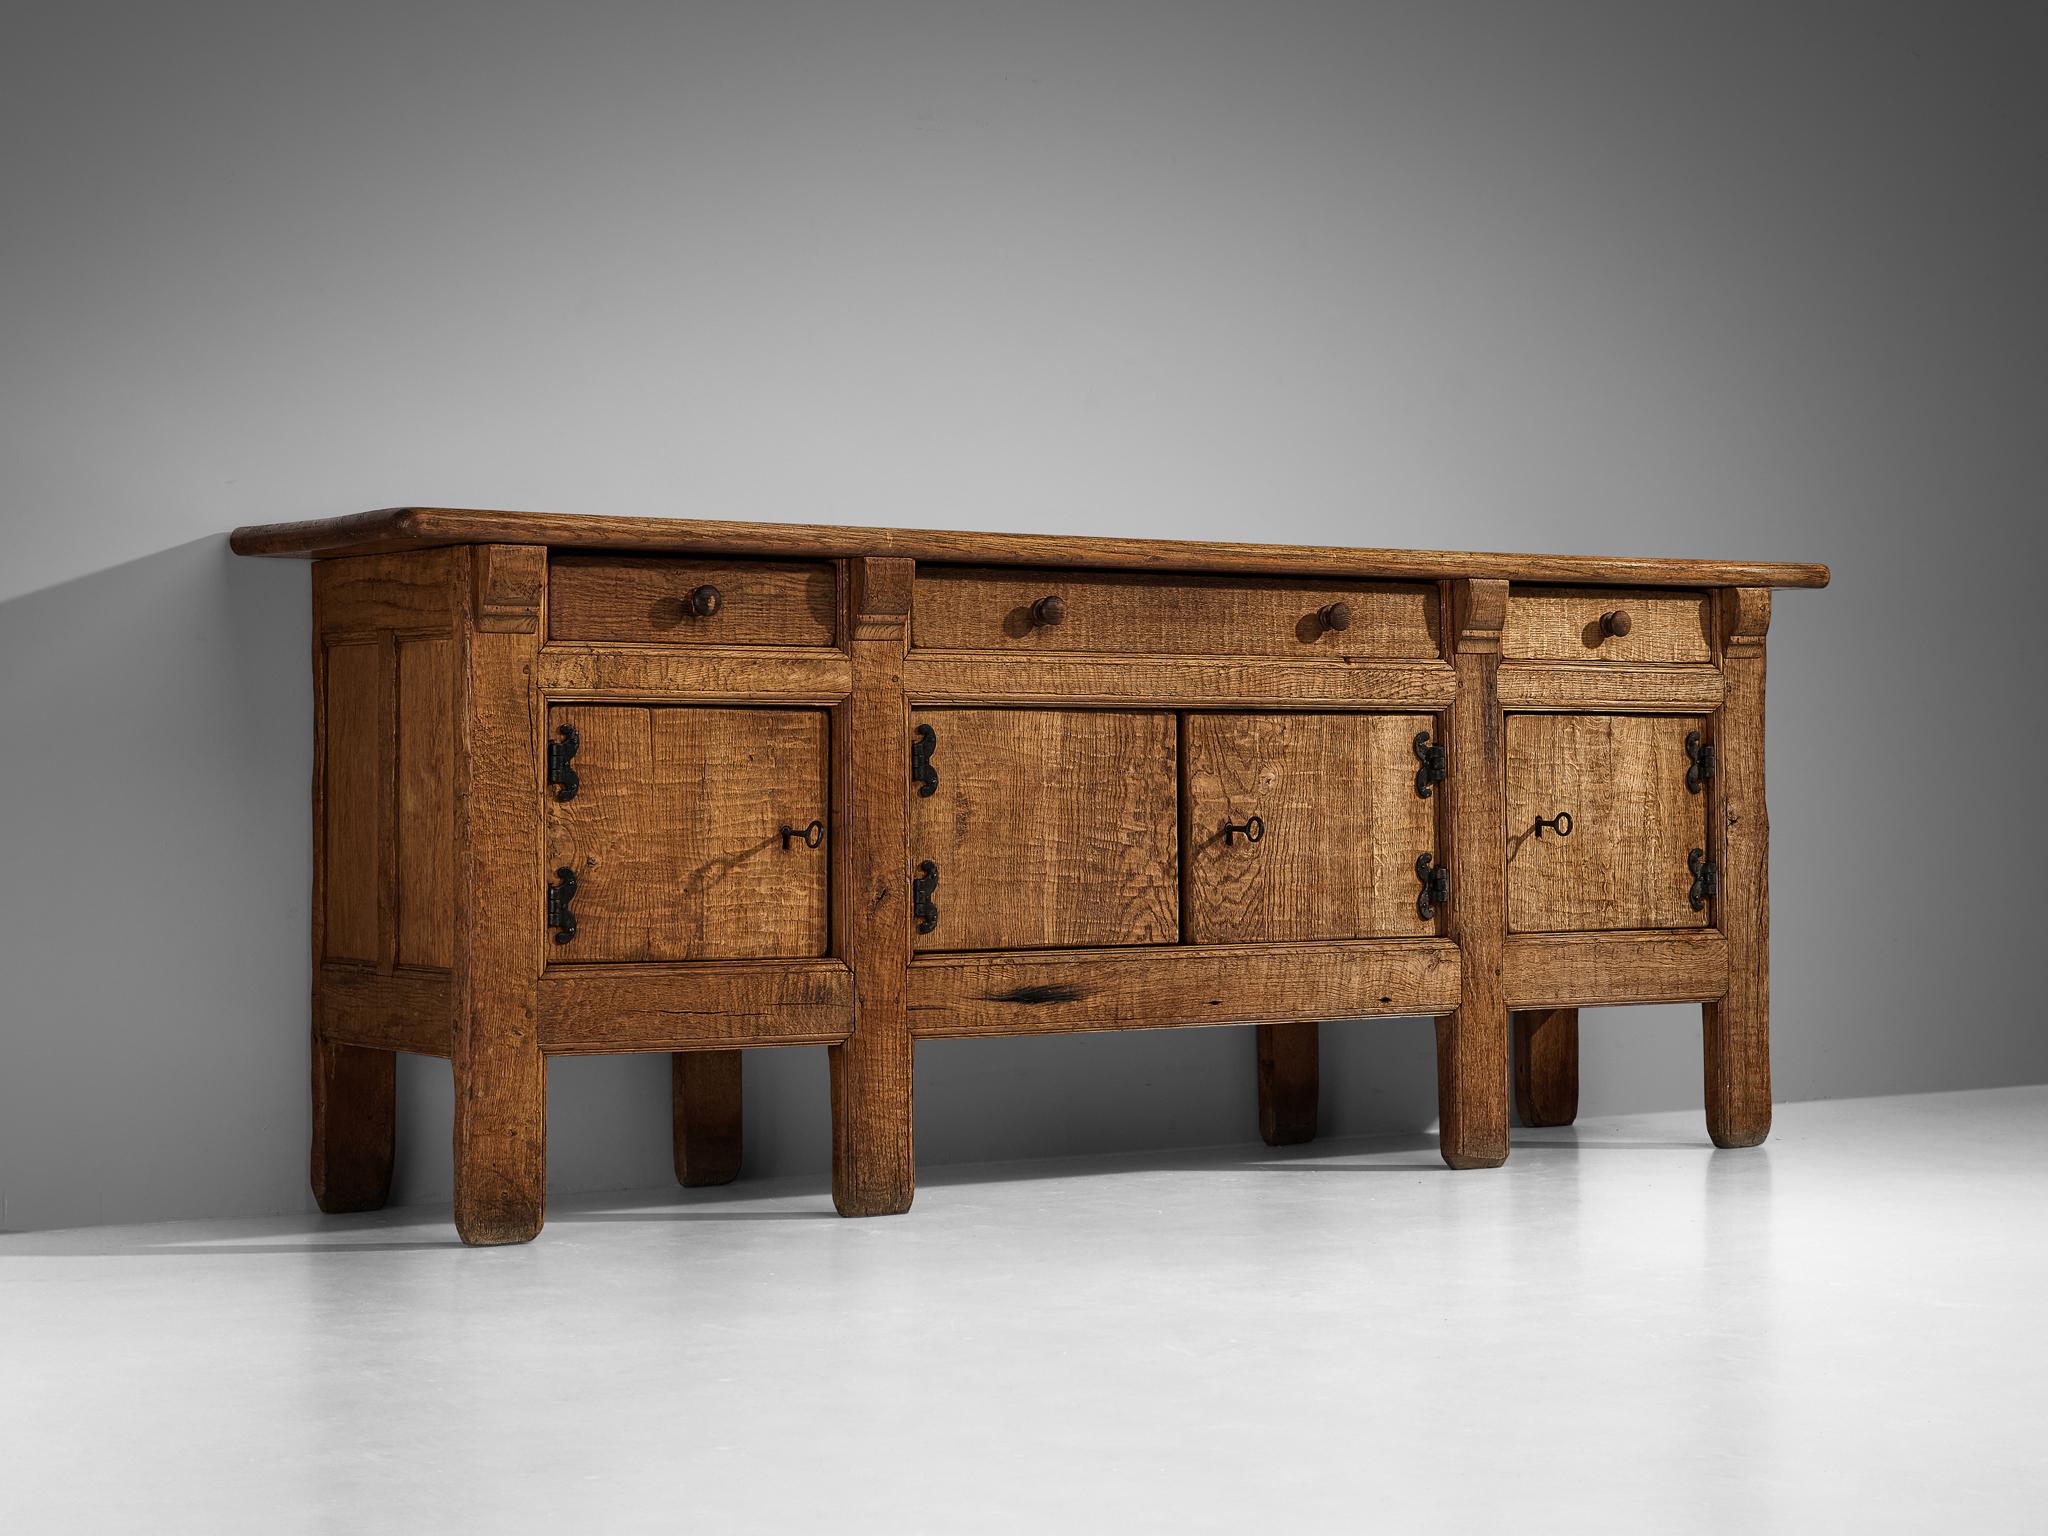 French Brutalist Sideboard in Oak with Iron Decorative Elements 1